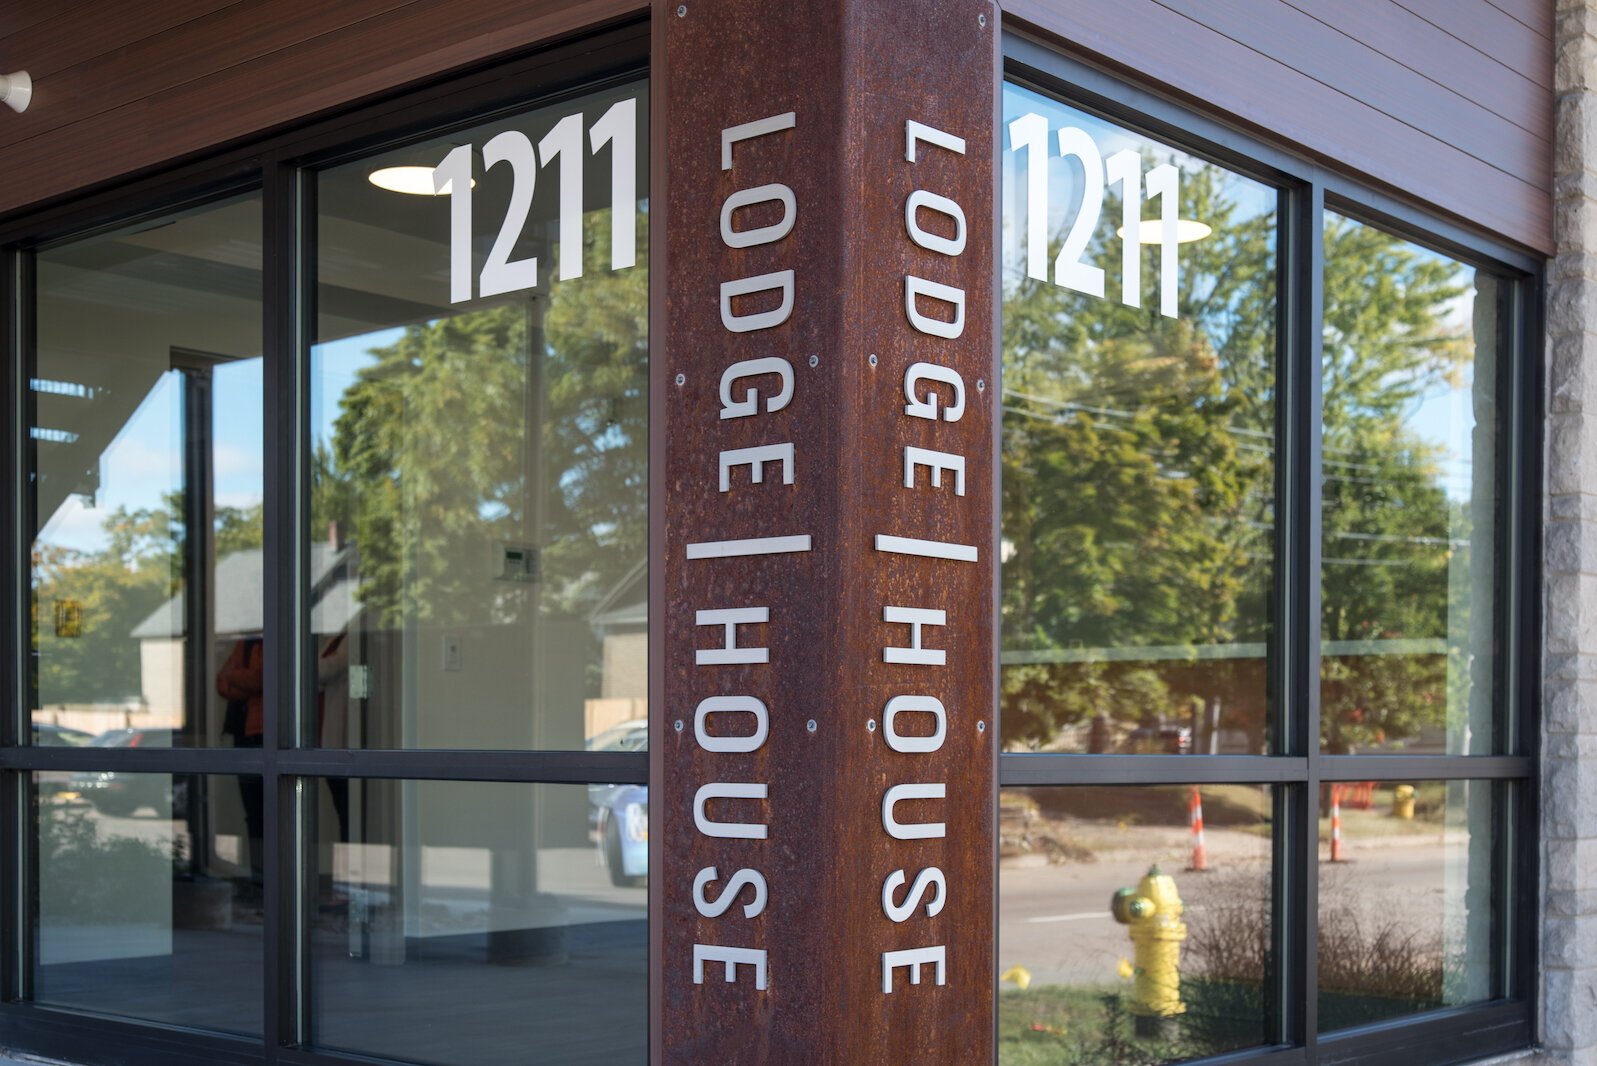 The months-long conversion of the former Knights Inn Motel at 1211 S. Westnedge Ave. has been completed and the LodgeHouse is available for occupancy.